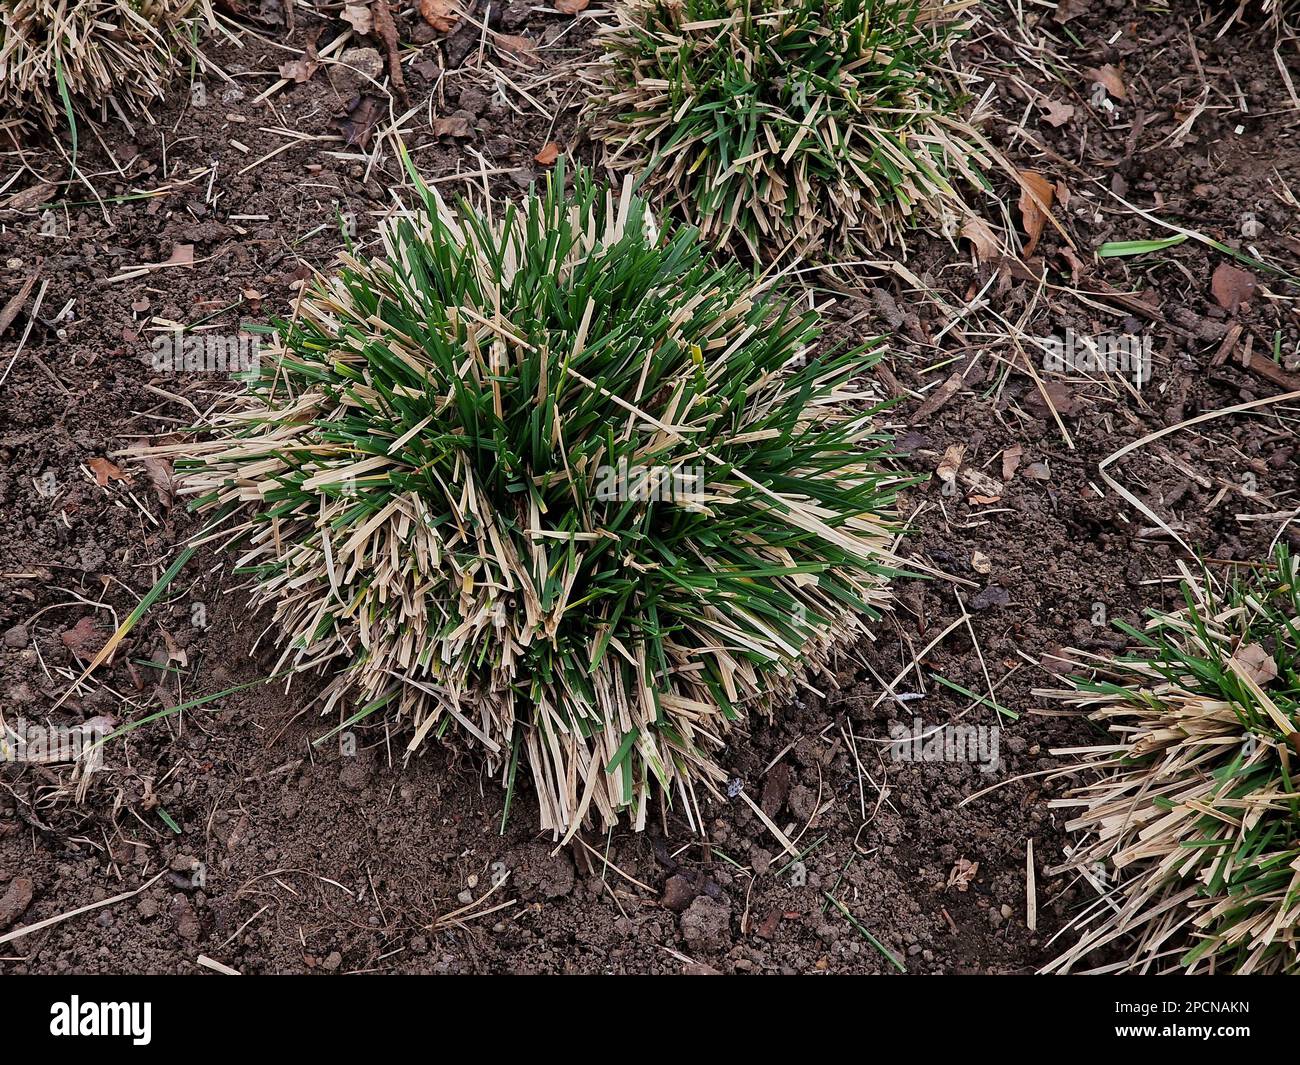 Closeup of the cut back garden plant deschampsia cespitosa goldtau or tufted hair grass seen planted in the ground in late winter. Stock Photo